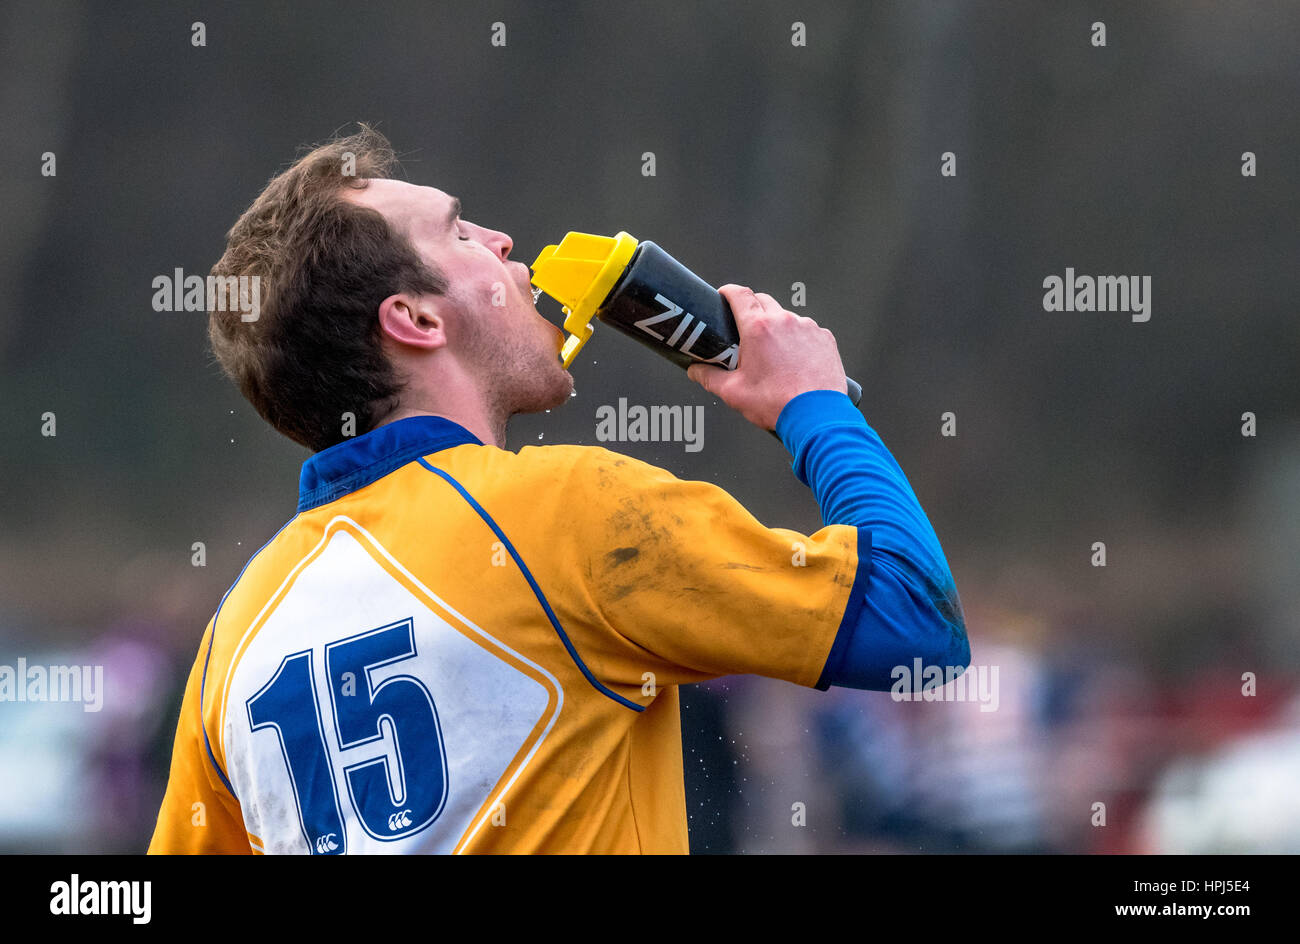 Rugby union football player drinking from a water bottle. Stock Photo